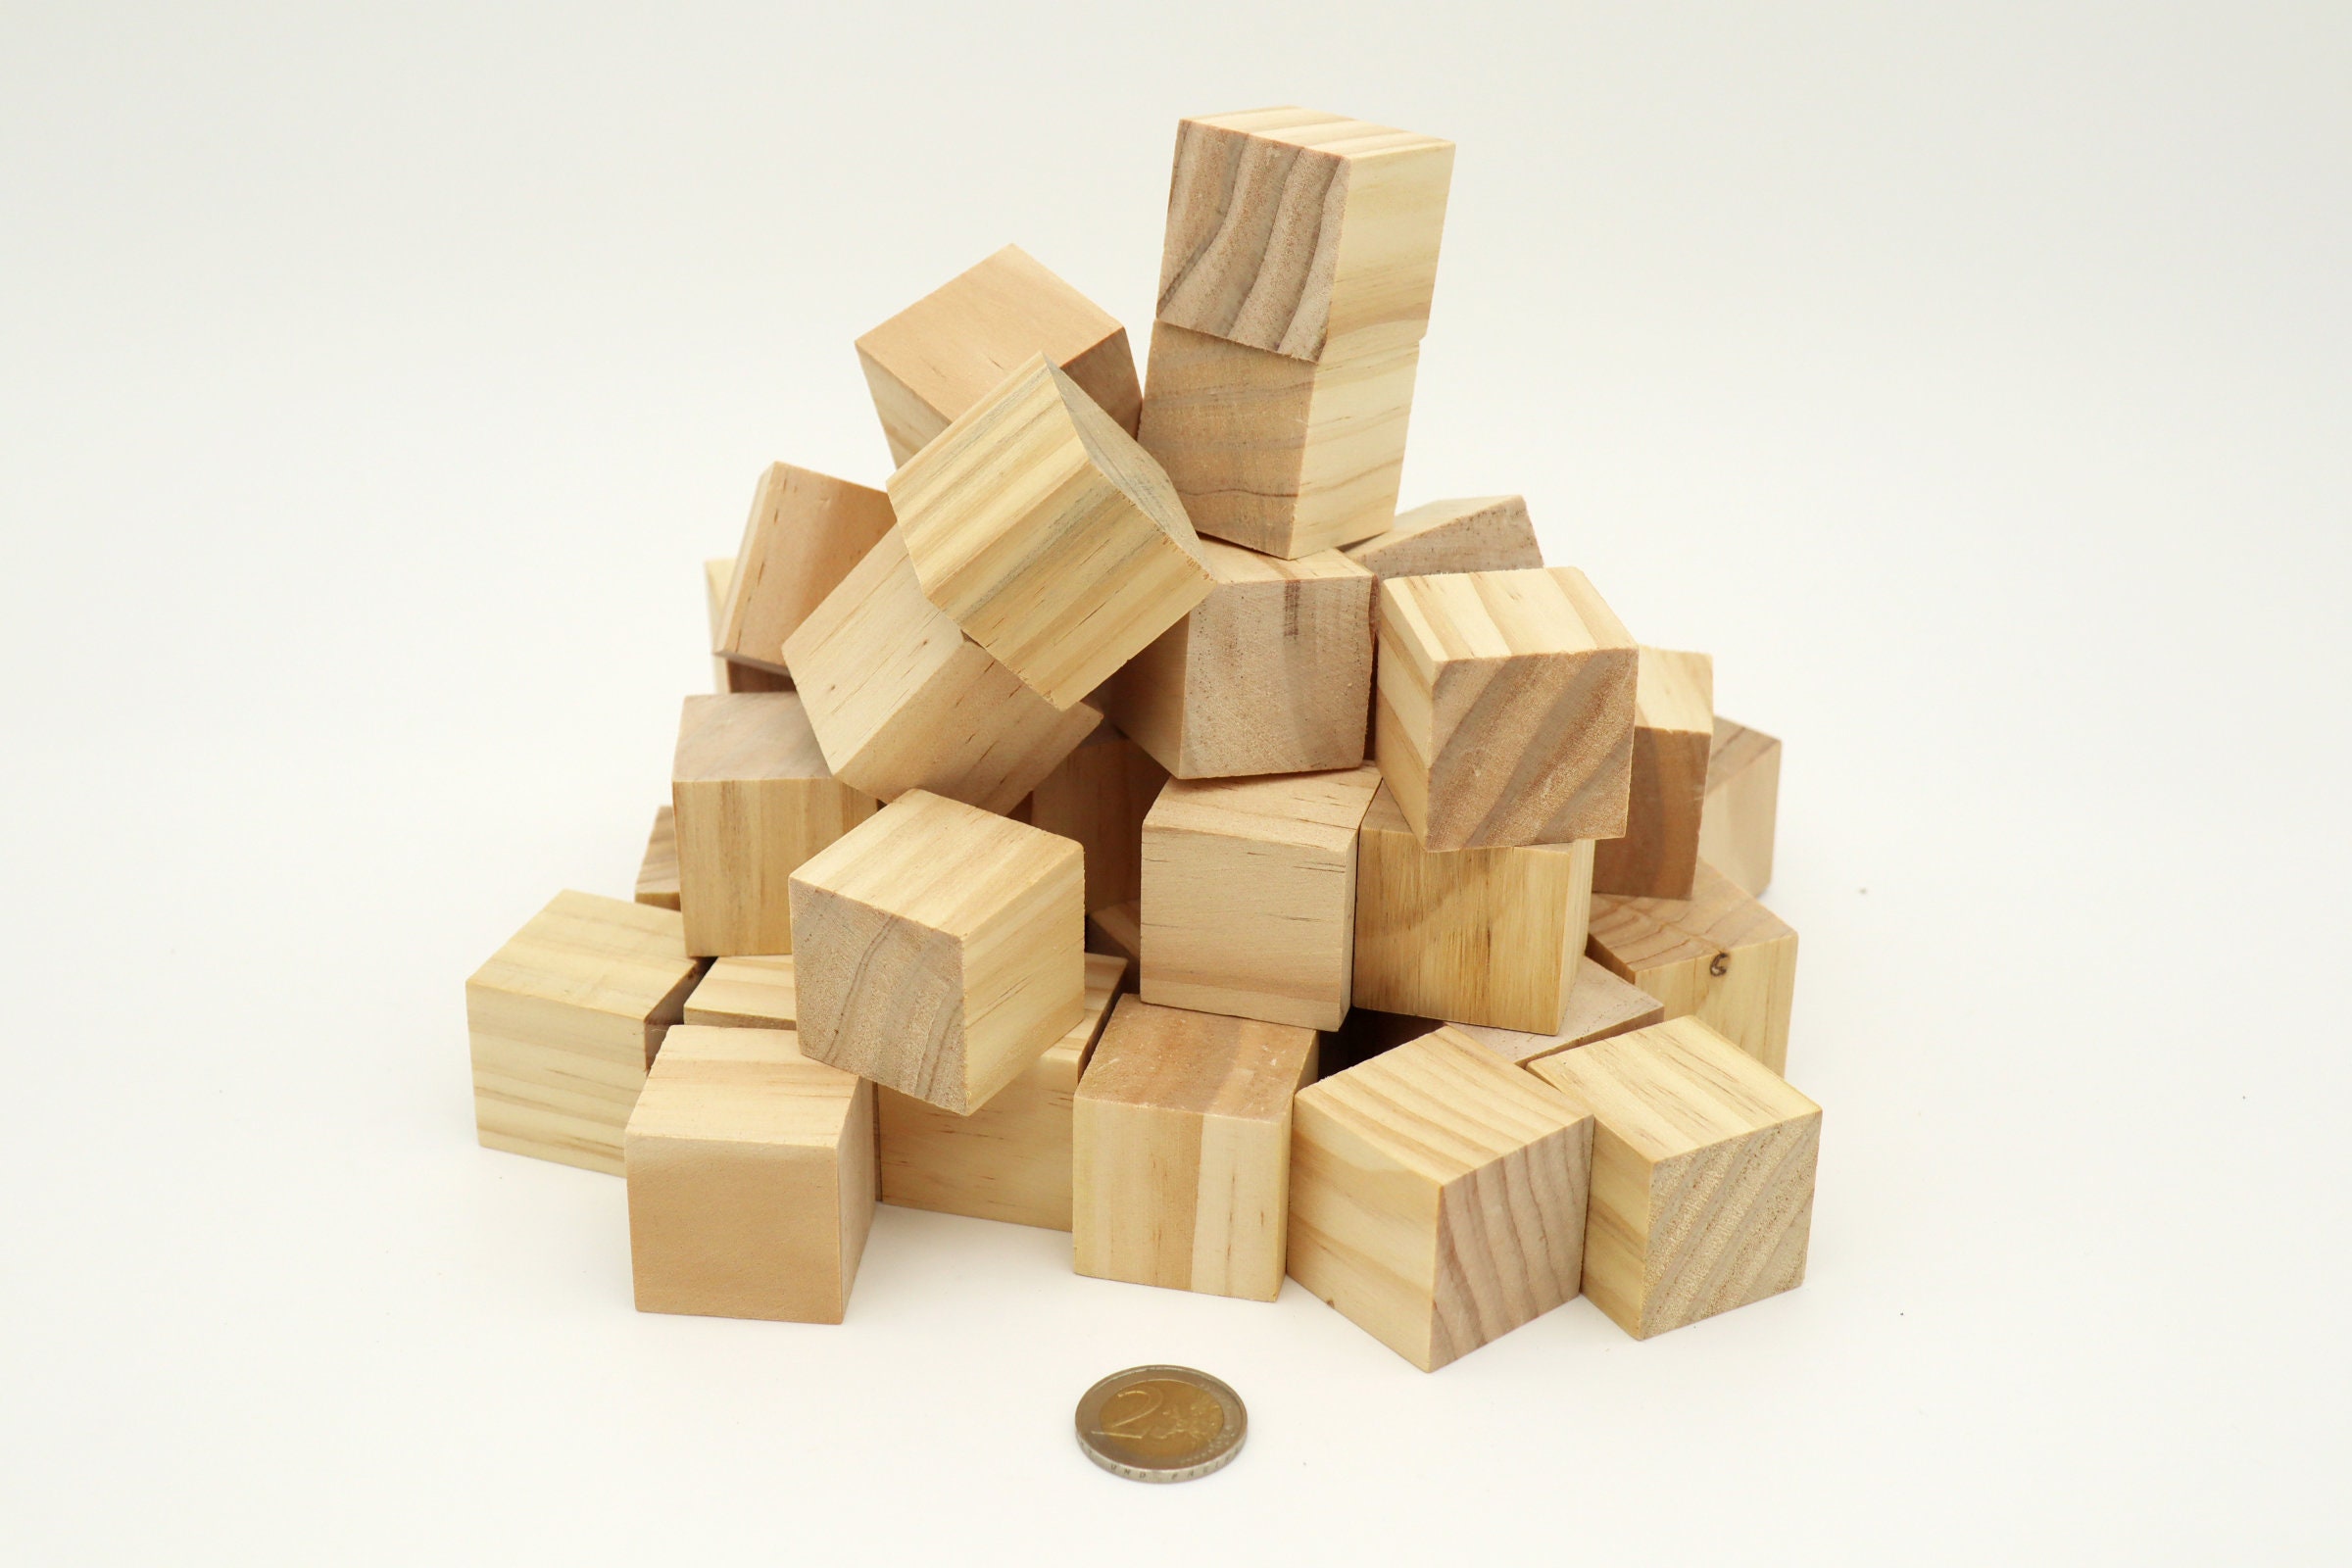 10 Wood Cubes 15mm Wooden Craft Blocks Unfinished Natural 